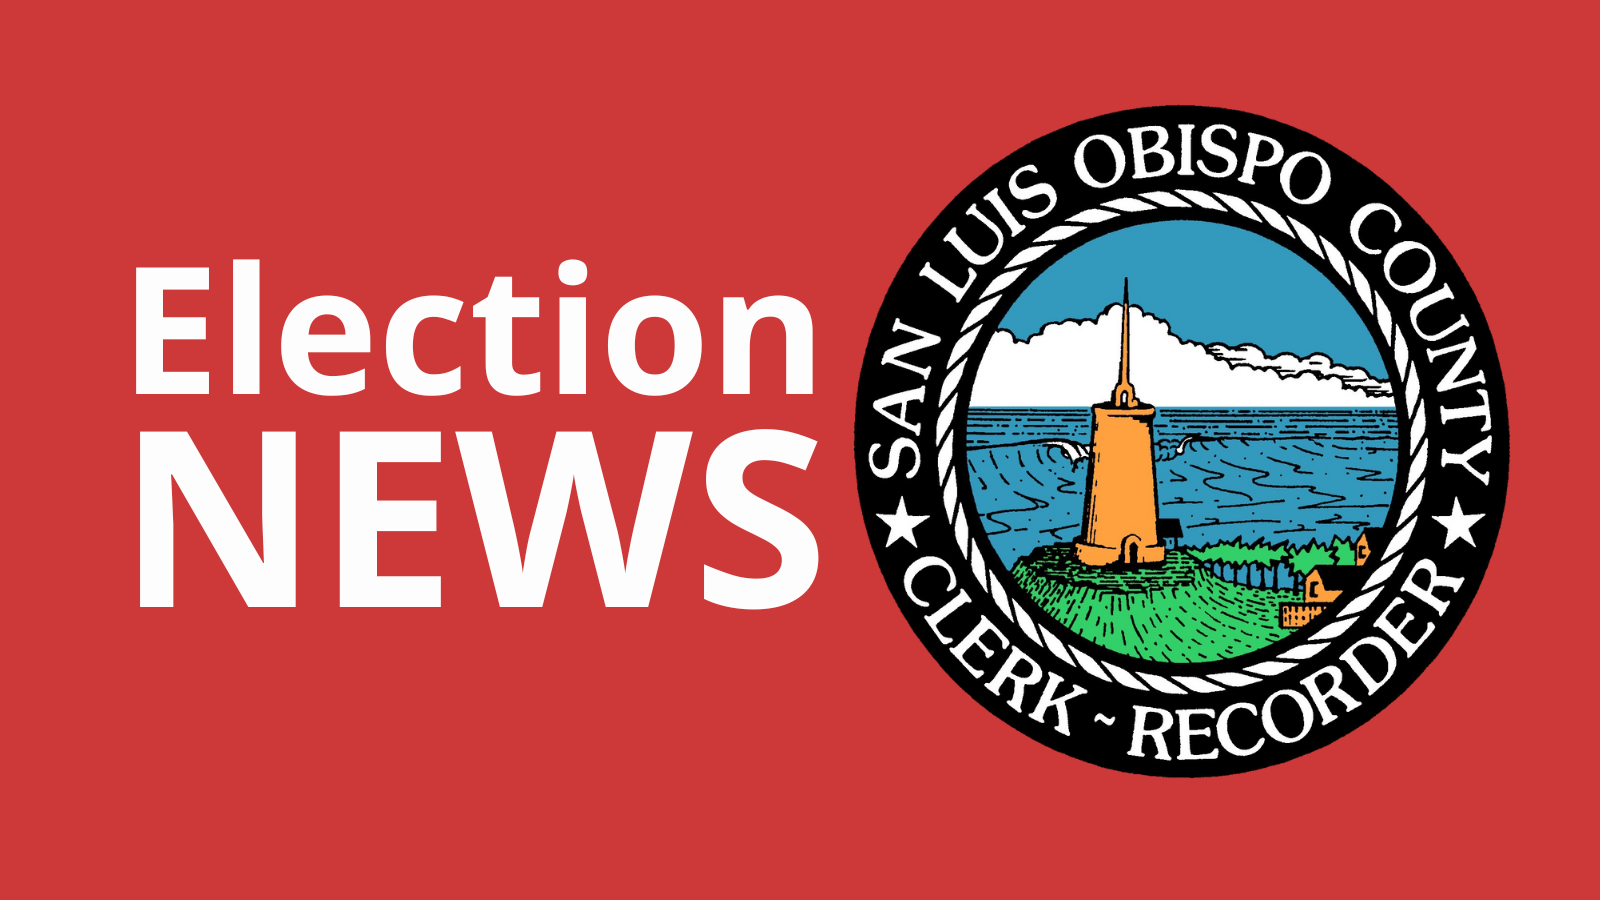 The official Clerk-Recorder Seal next to the words Election News